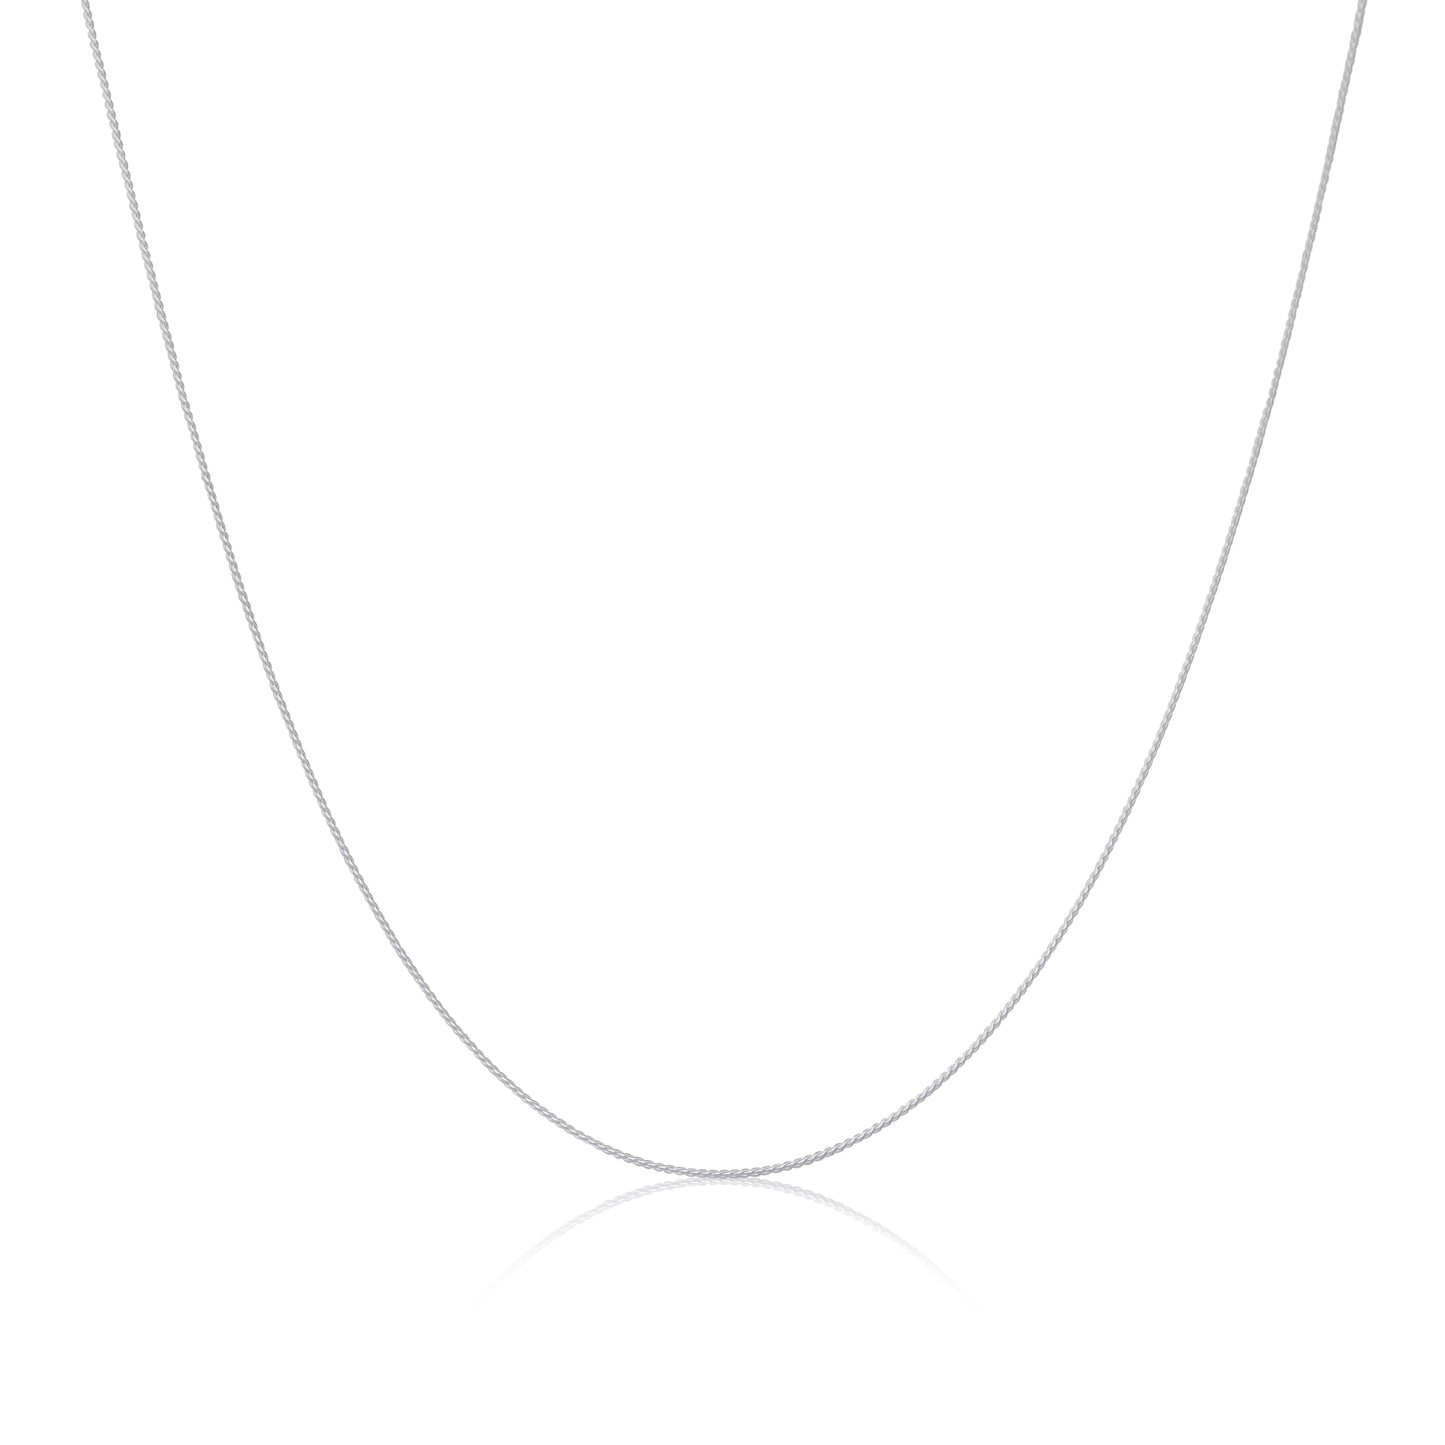 Fine Sterling Silver Foxtail Chain Necklace 14 - 28 Inches